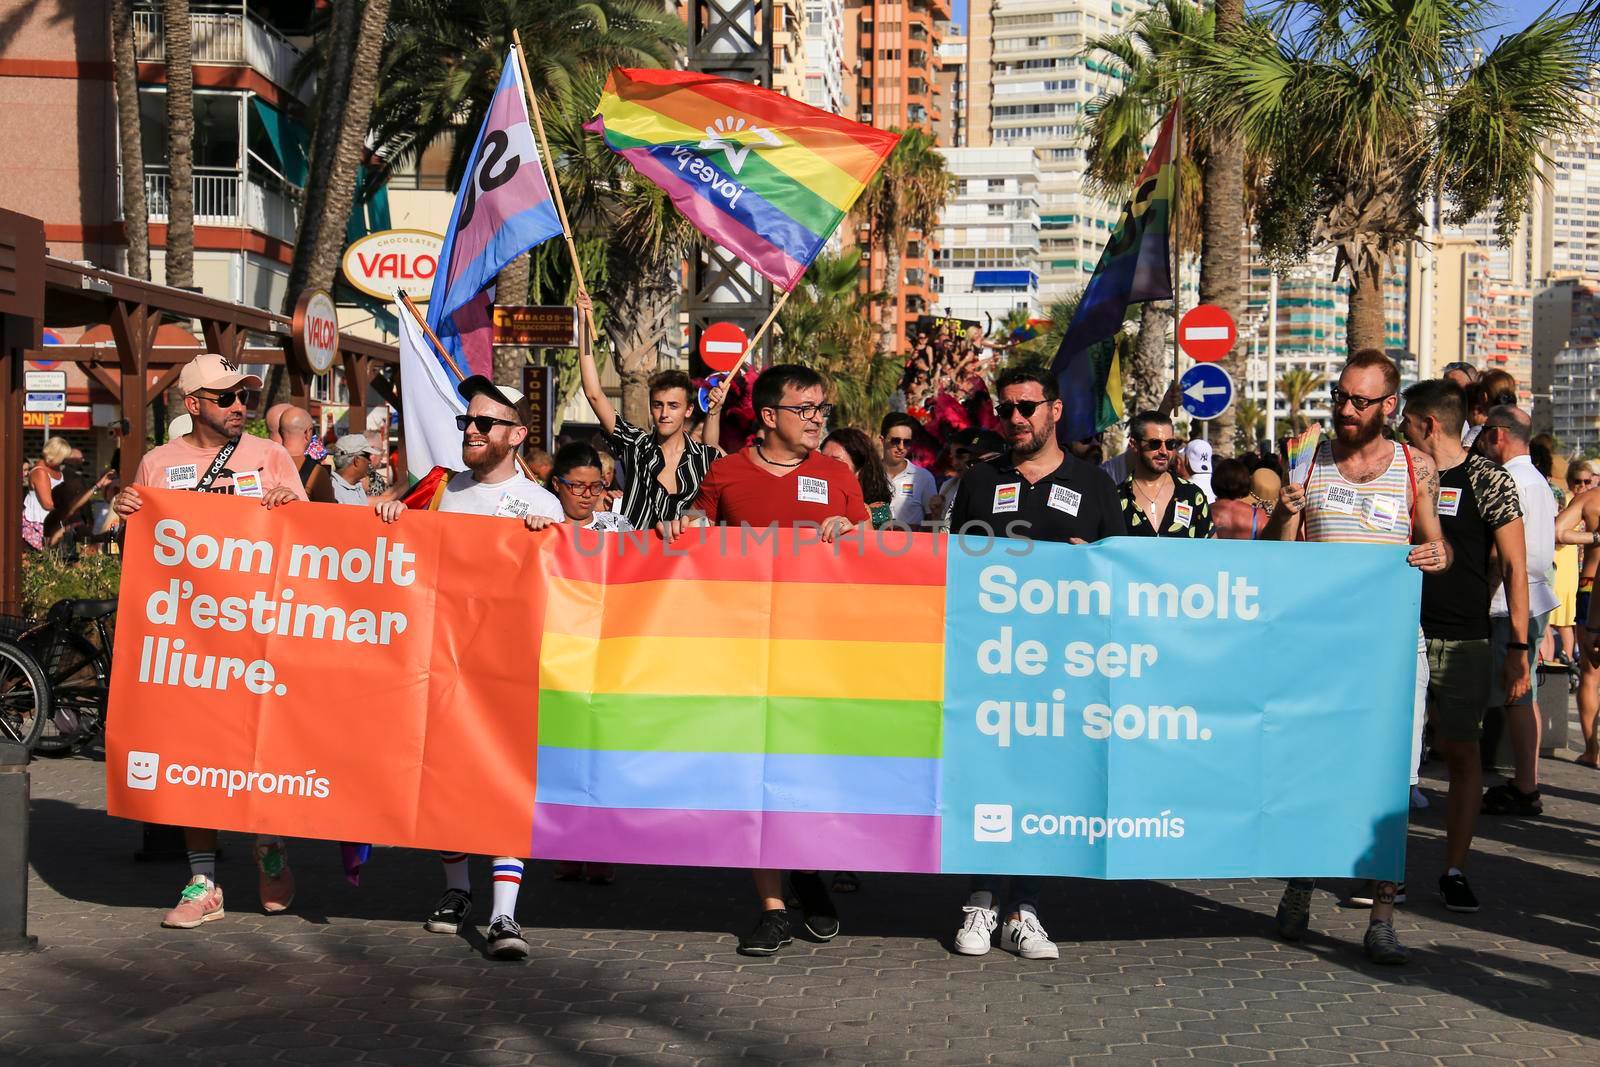 Politicians attending the proclamation of the Gay Pride Day in Benidorm by soniabonet